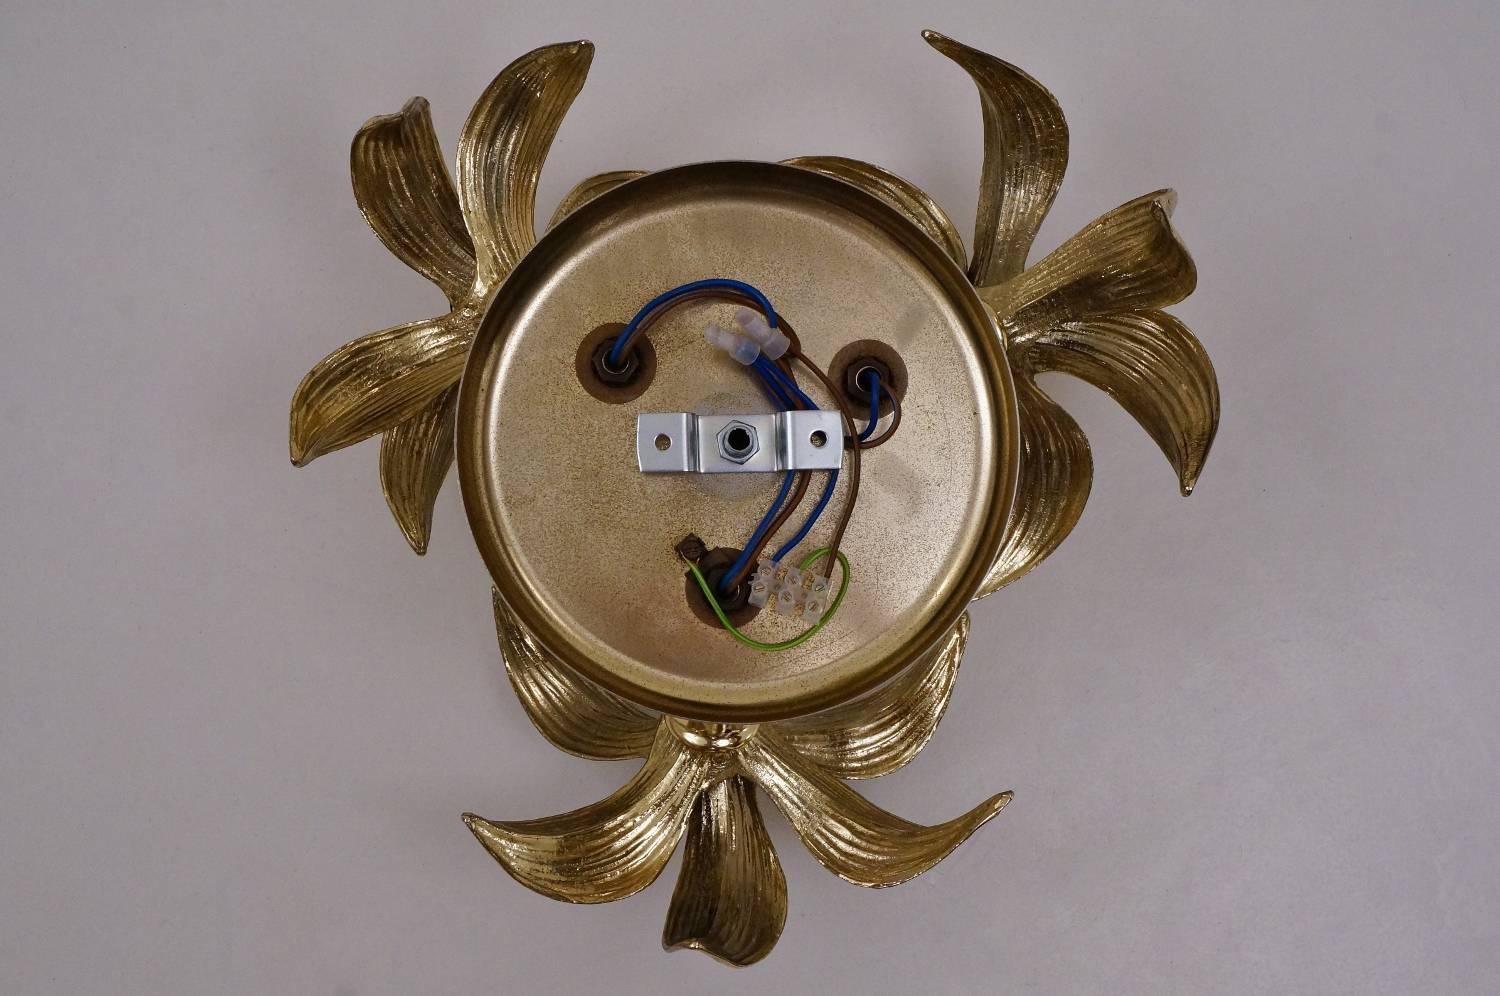 Brass flower light with three flowers in the style of Willy Daro by Massive, circa 1970s, Belgian.

Thoroughly cleaned, fully rewired, in full working order and ready to use.

This vintage ceiling light consists of a group of three gold tone brass